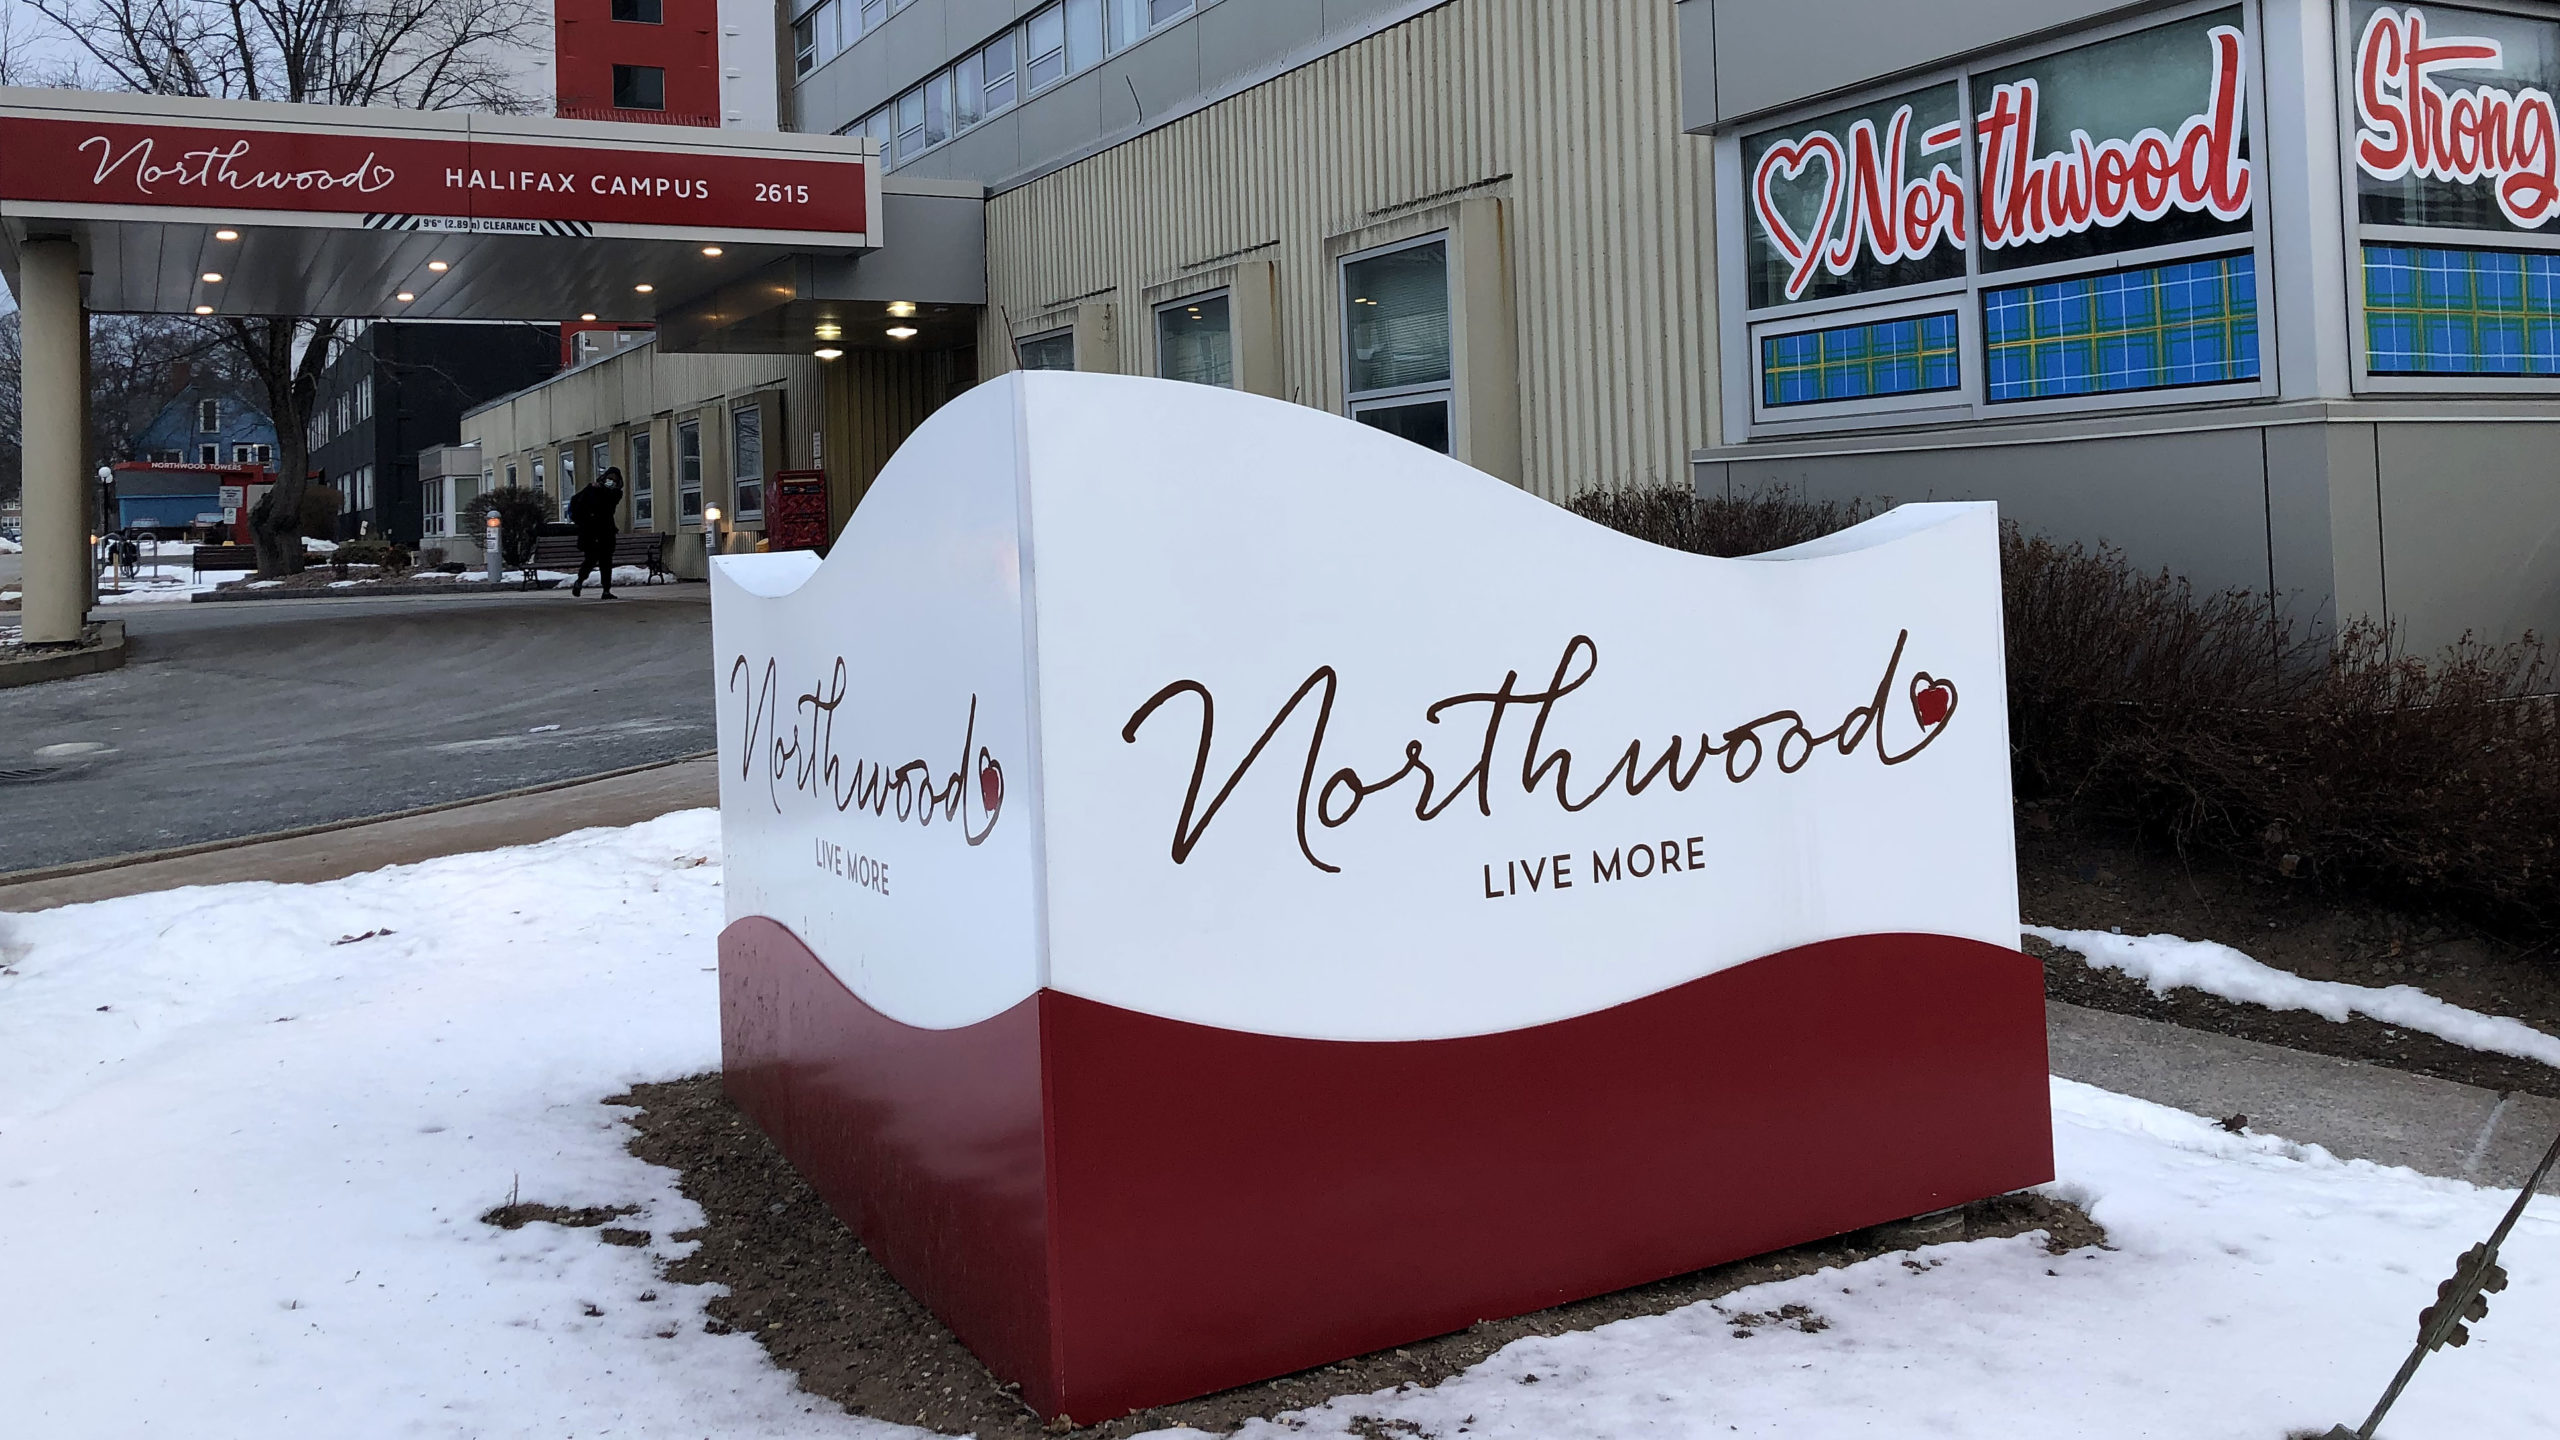 The image shows the outside of the Northwood facility in Halifax.